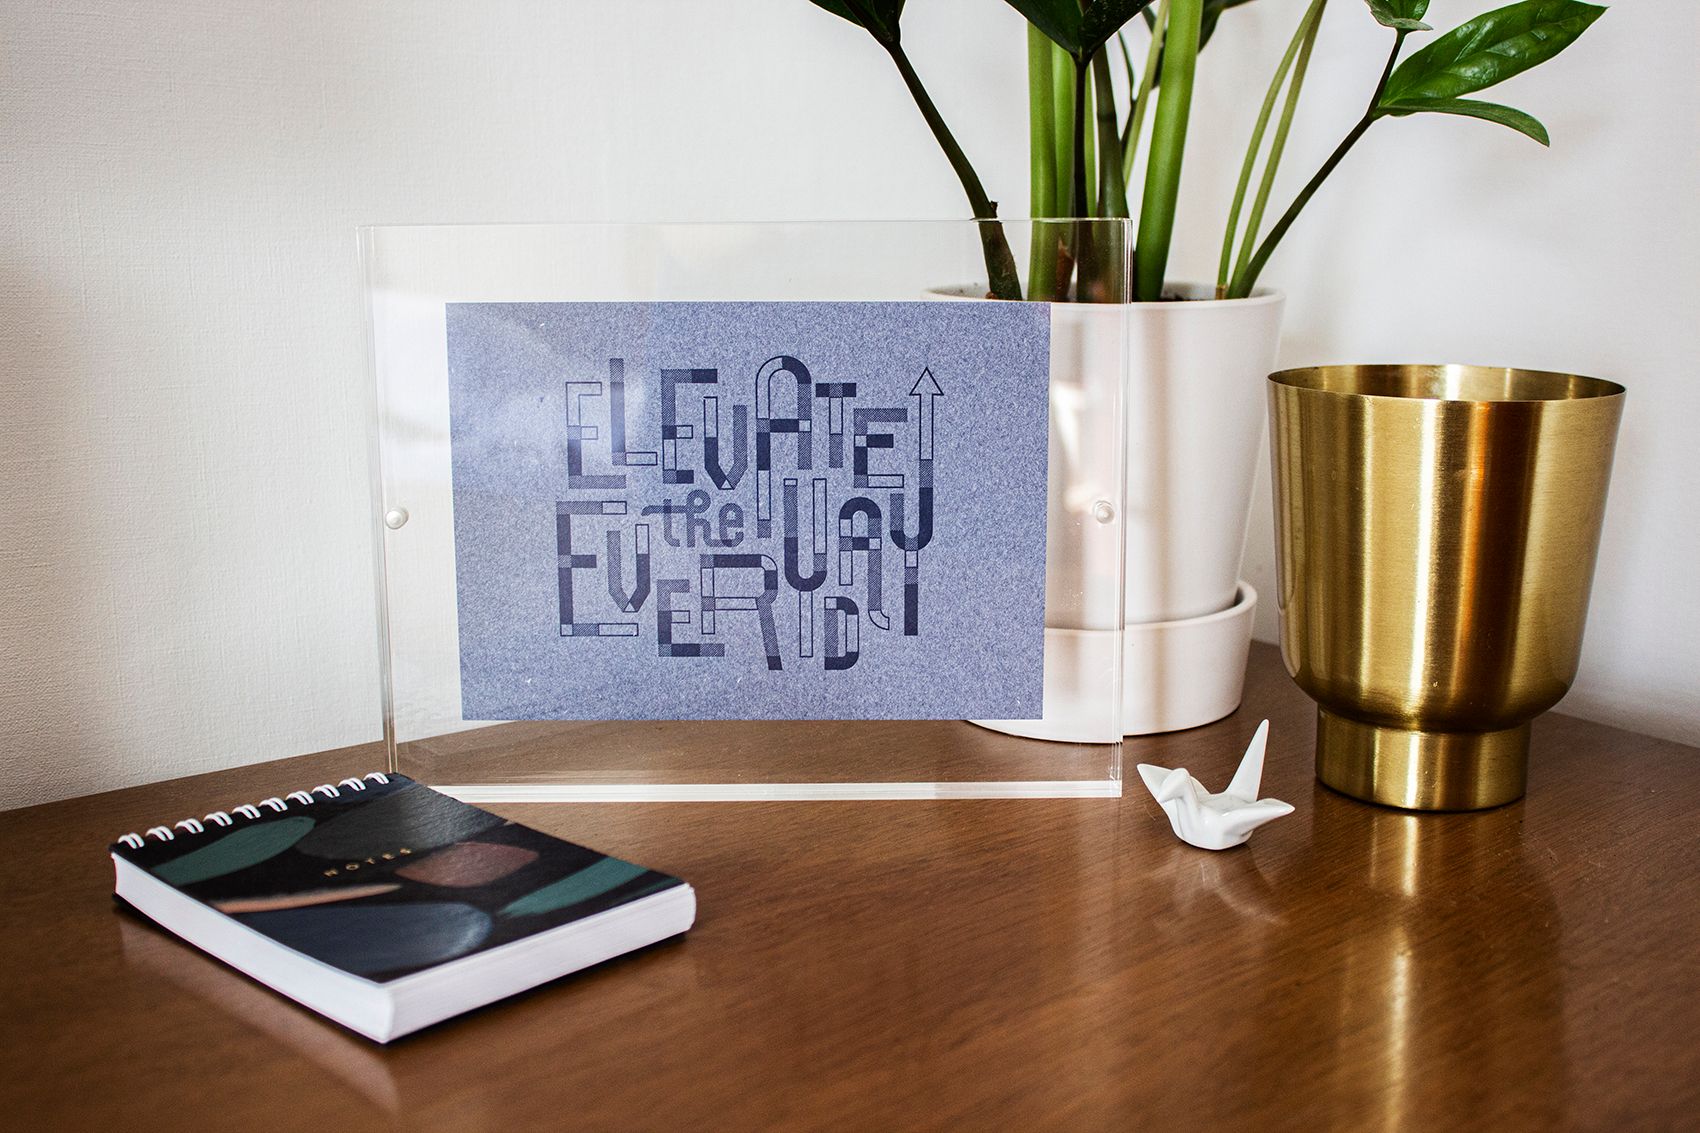 Elevate the Everyday card framed in an acrylic frame and styled next to a plant and notebook